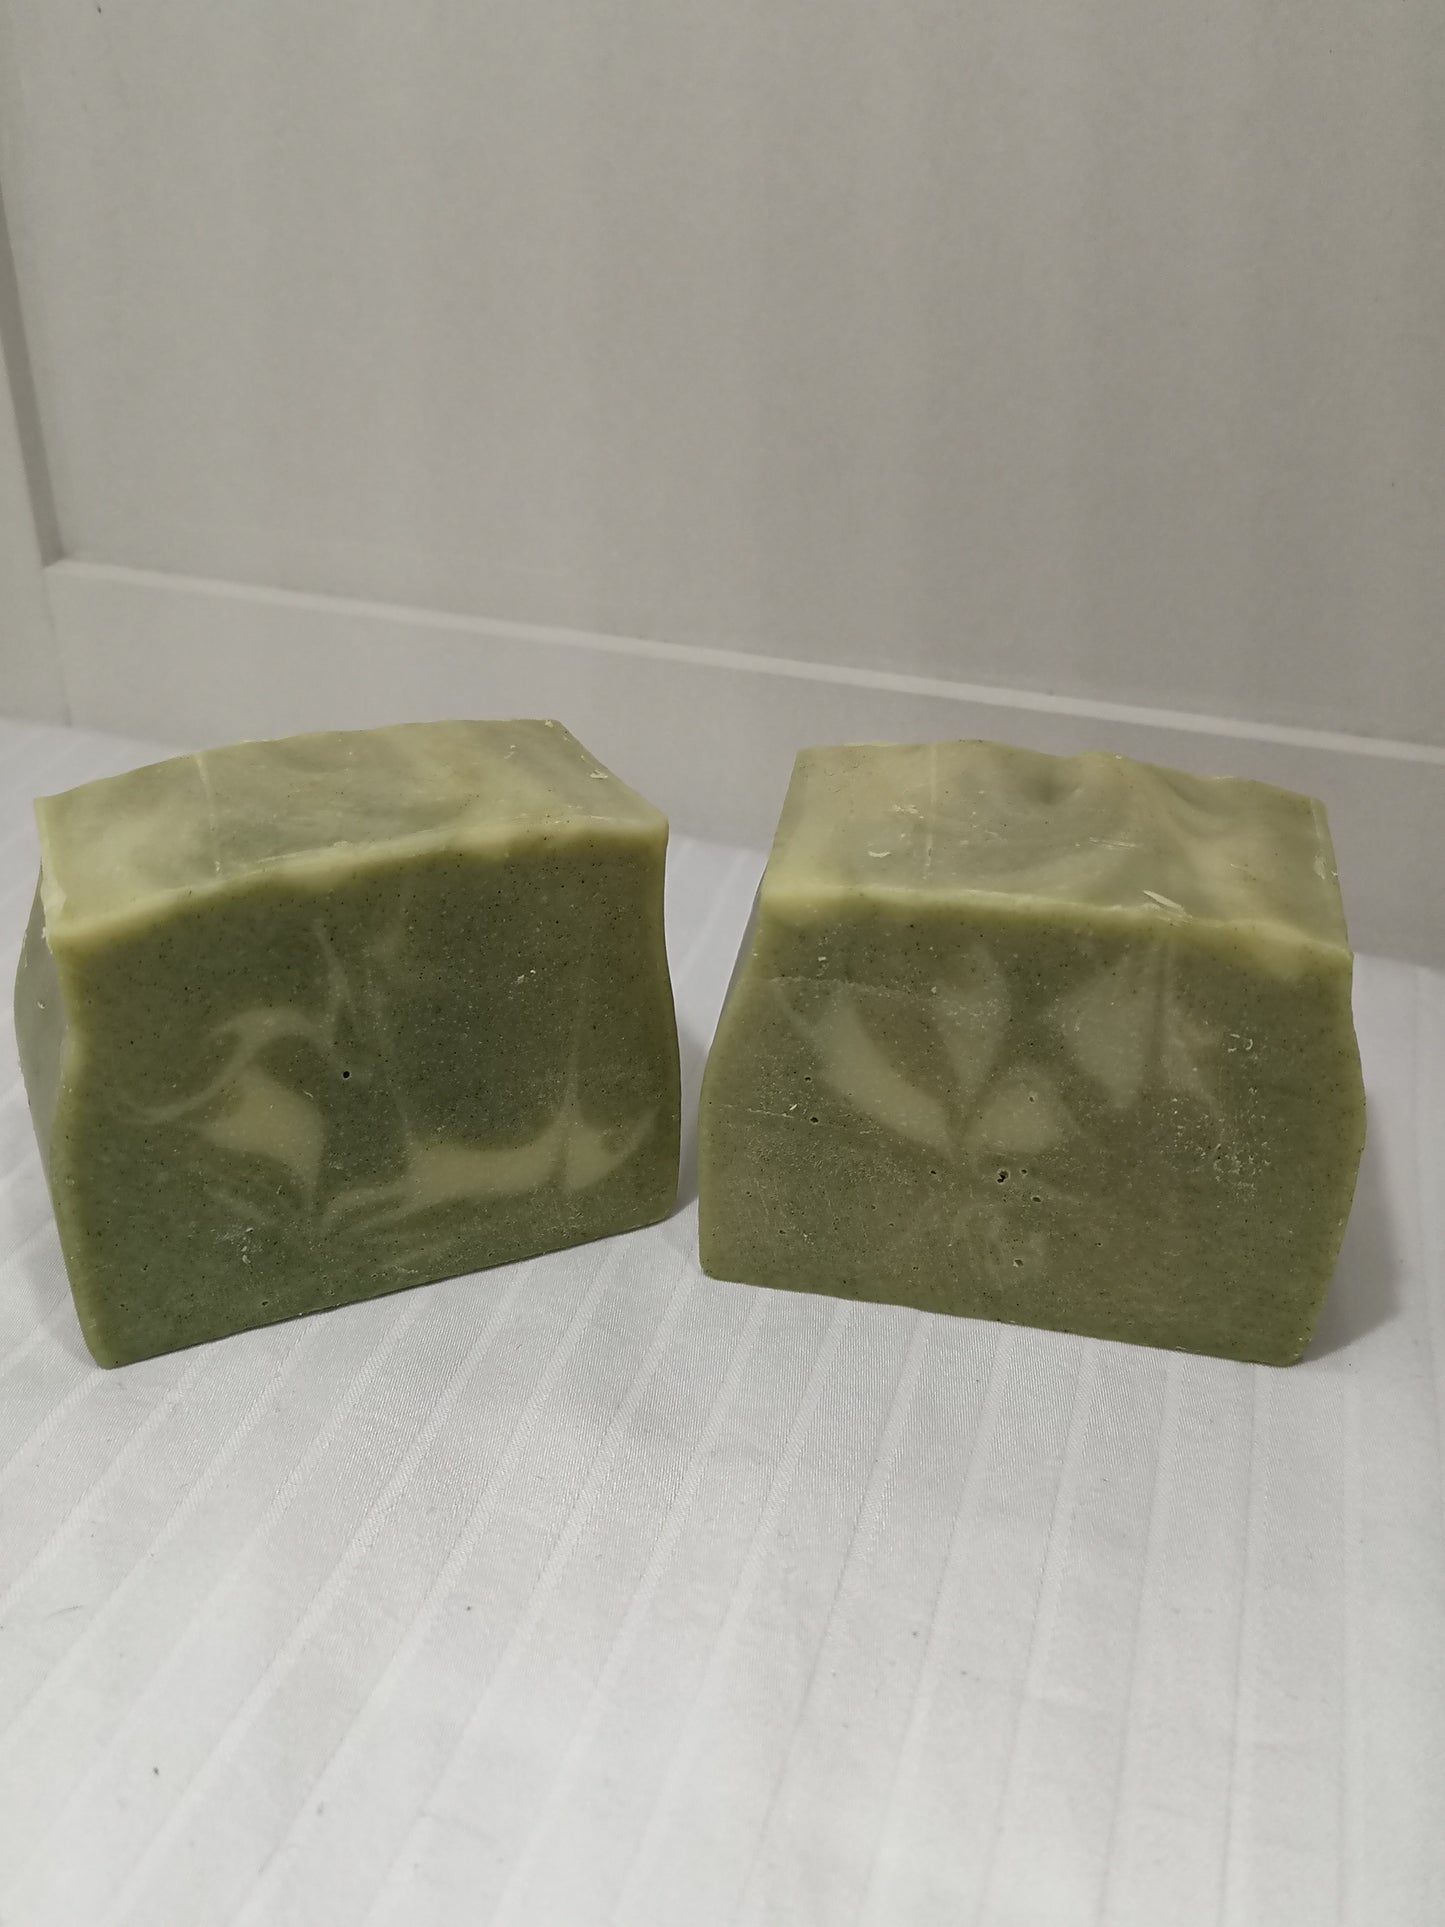 Two bars of green soap with white swirl feature on an off-white background. 